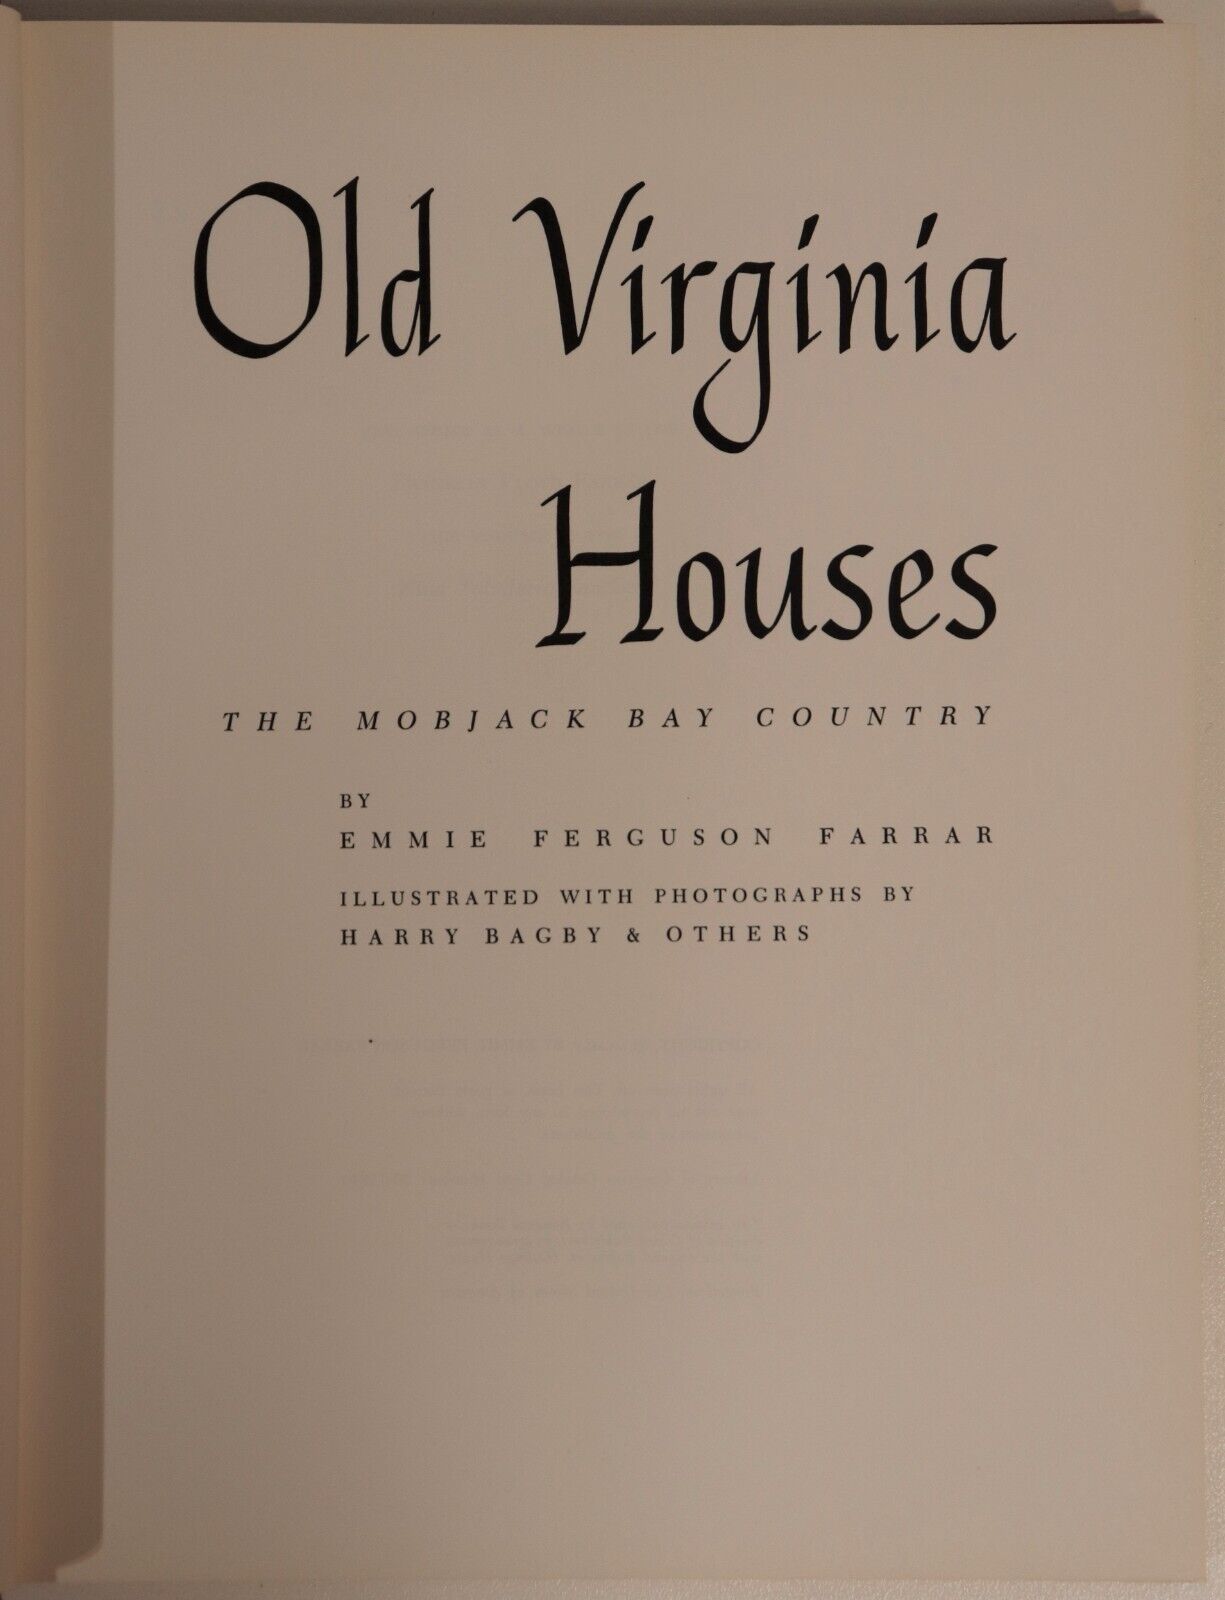 Old Virginia Houses by E.F. Farrar - 1955 - Vintage American Architecture Book - 0